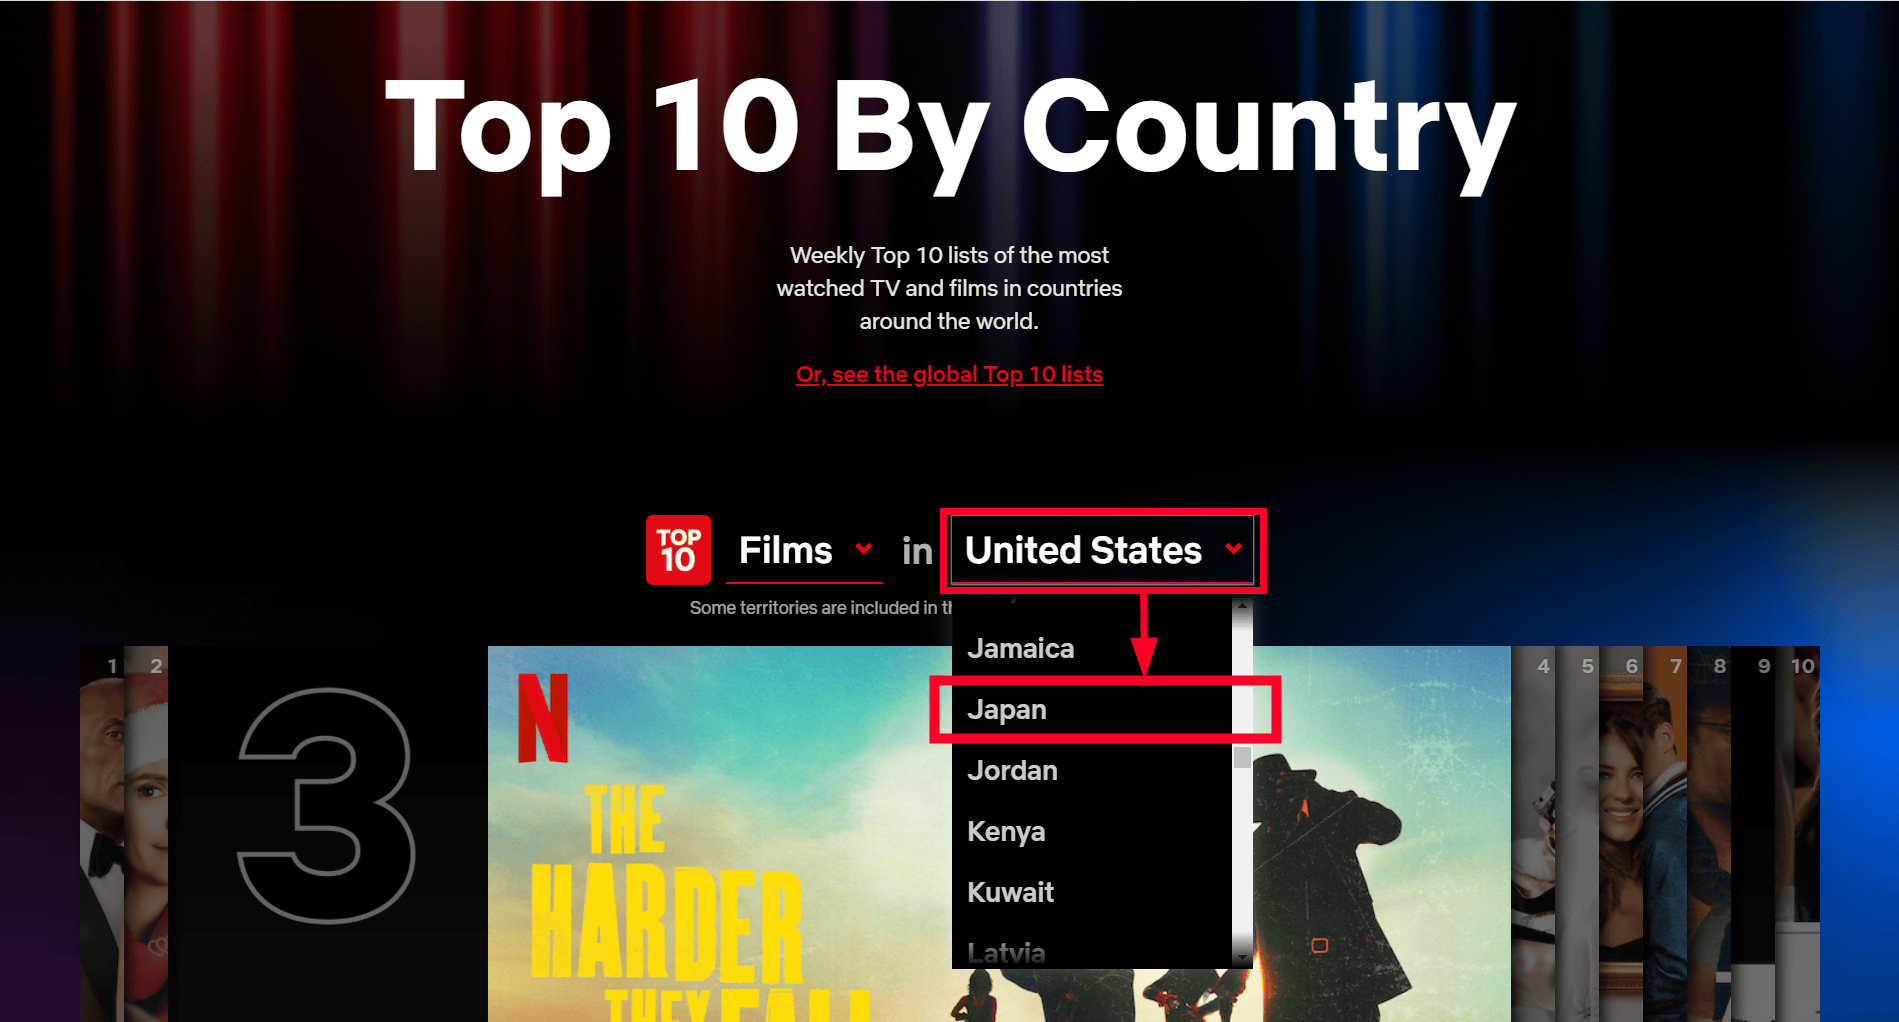 Netflix Top 10 - By Country: United States